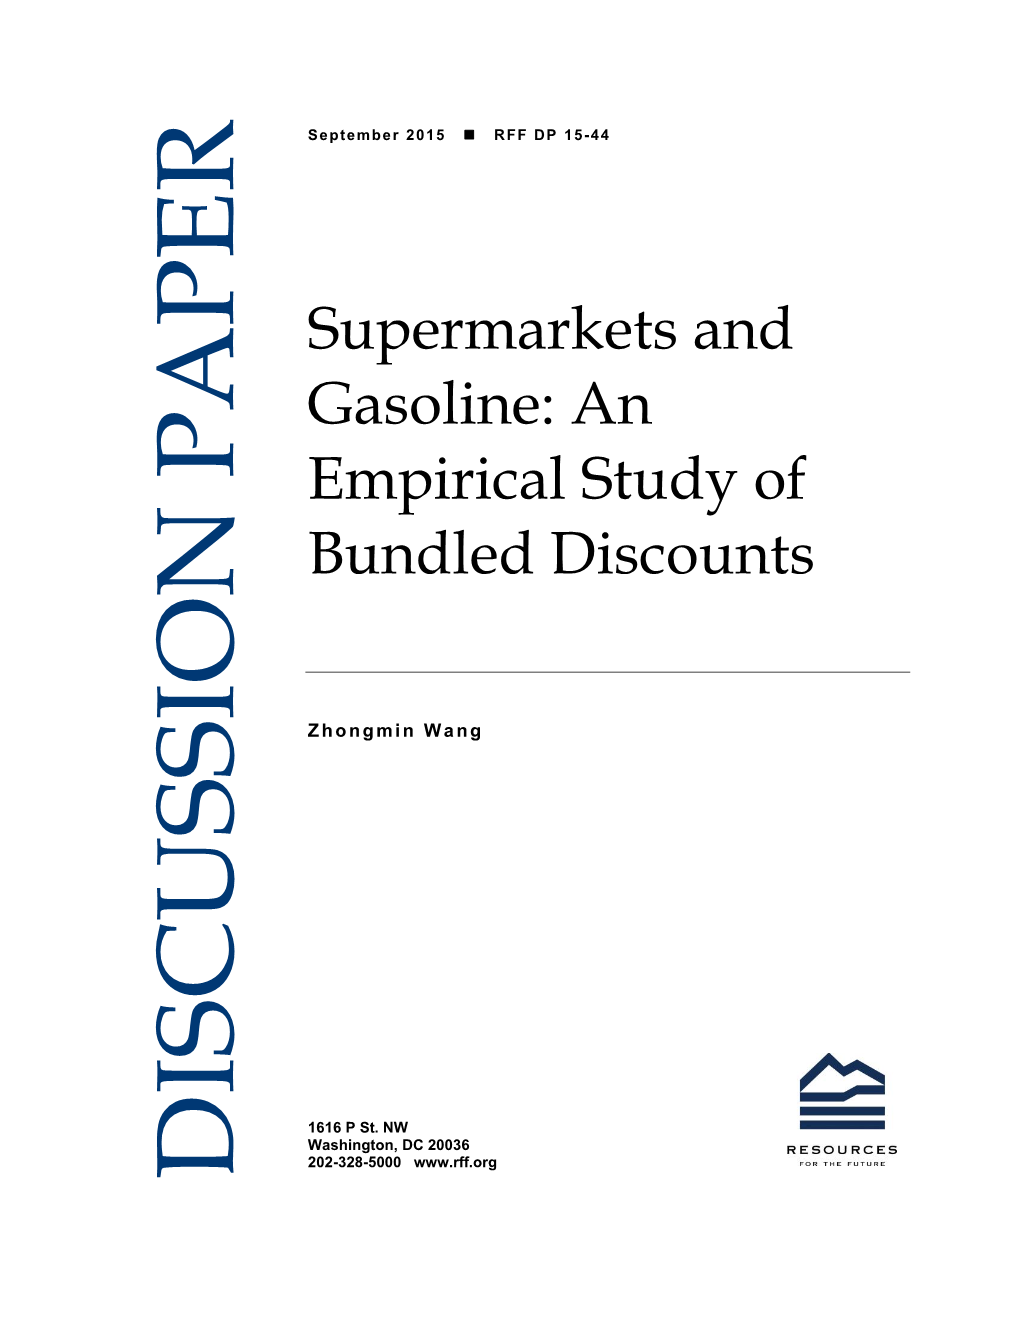 Supermarkets and Gasoline: an Empirical Study of Bundled Discounts